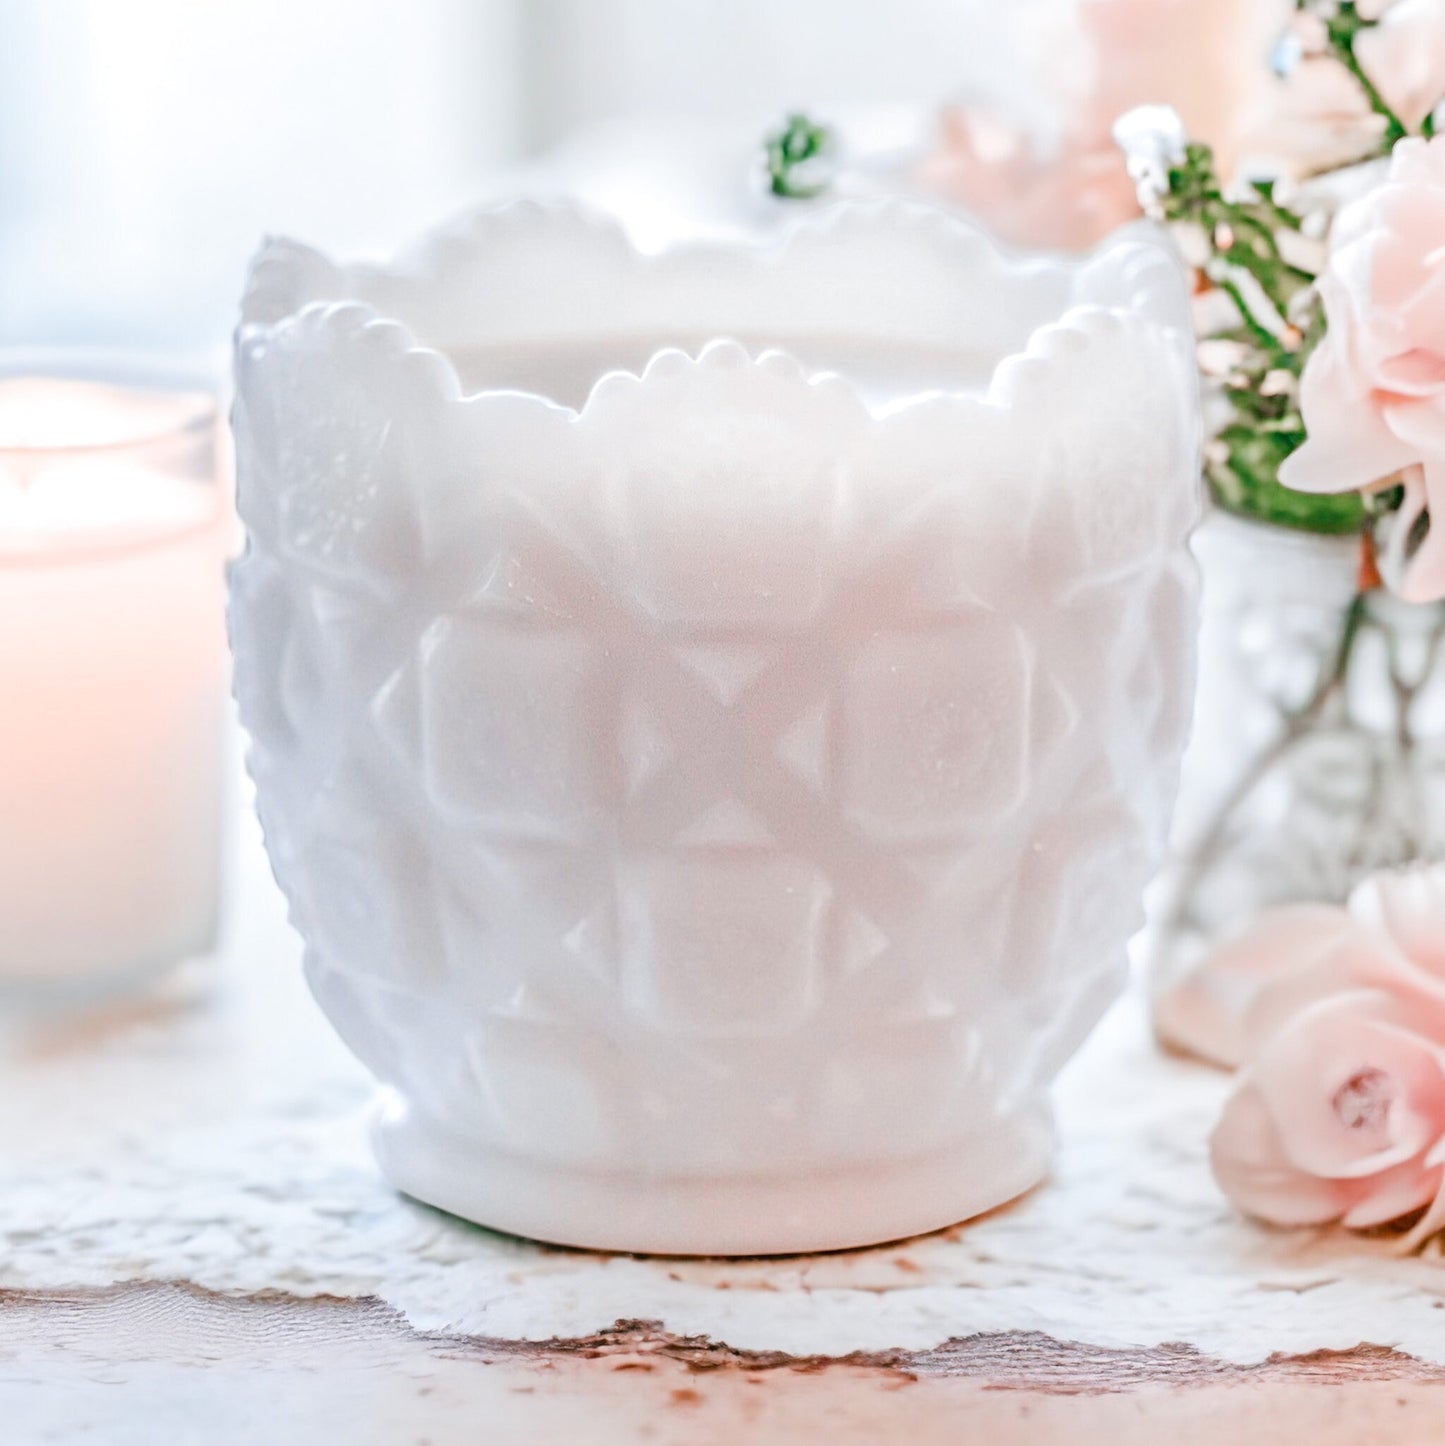 Scented Candle in Vintage Milk Glass Sugar Bowl